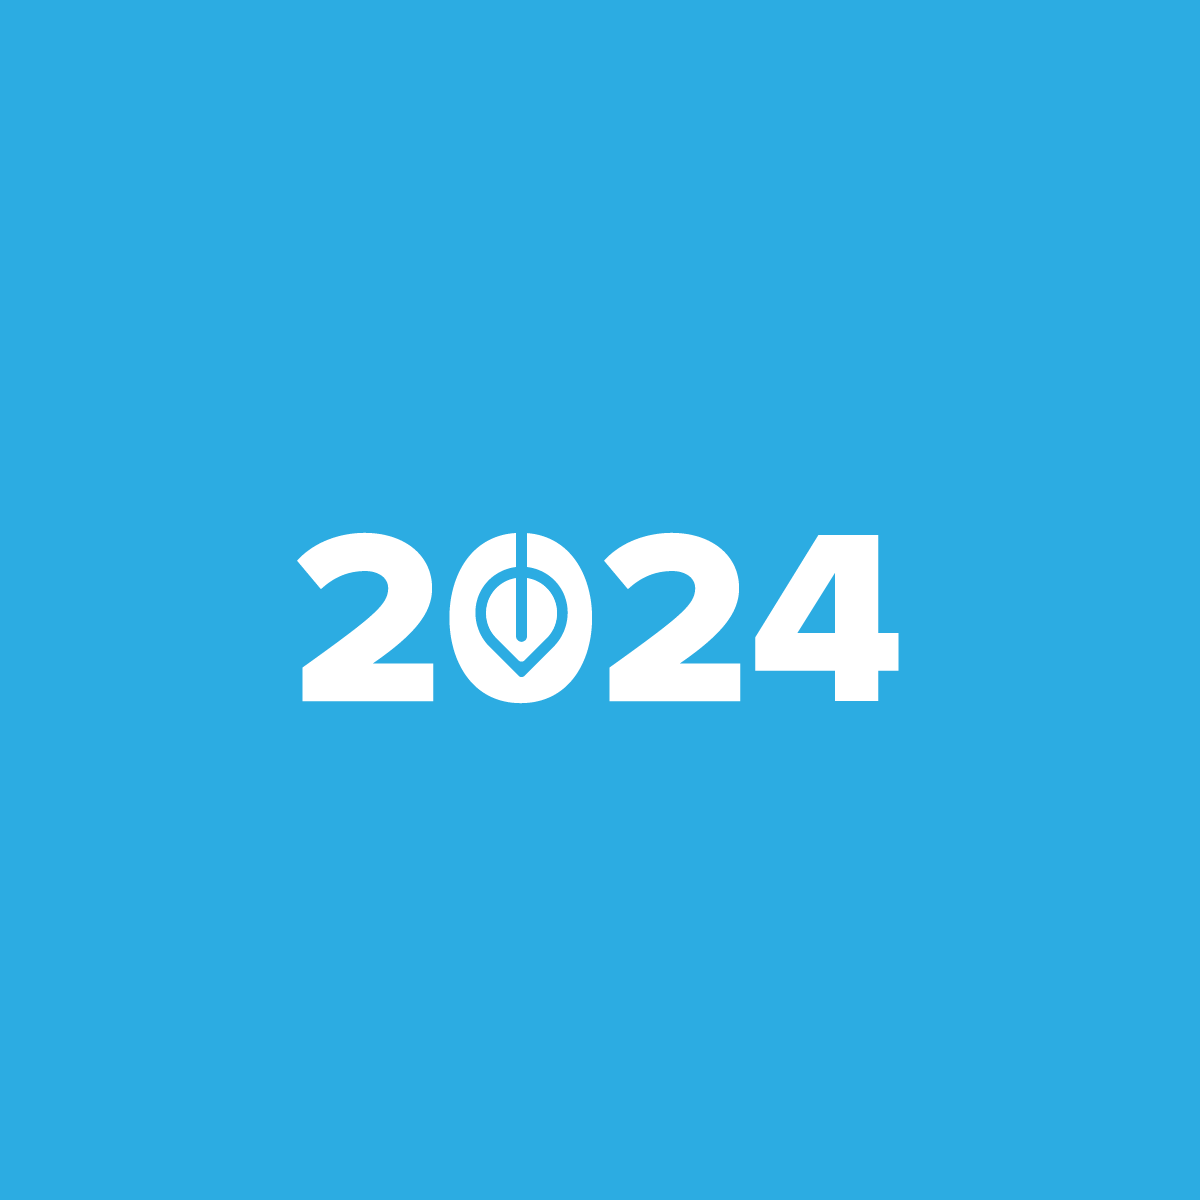 What to expect from sustainability and social impact in 2024